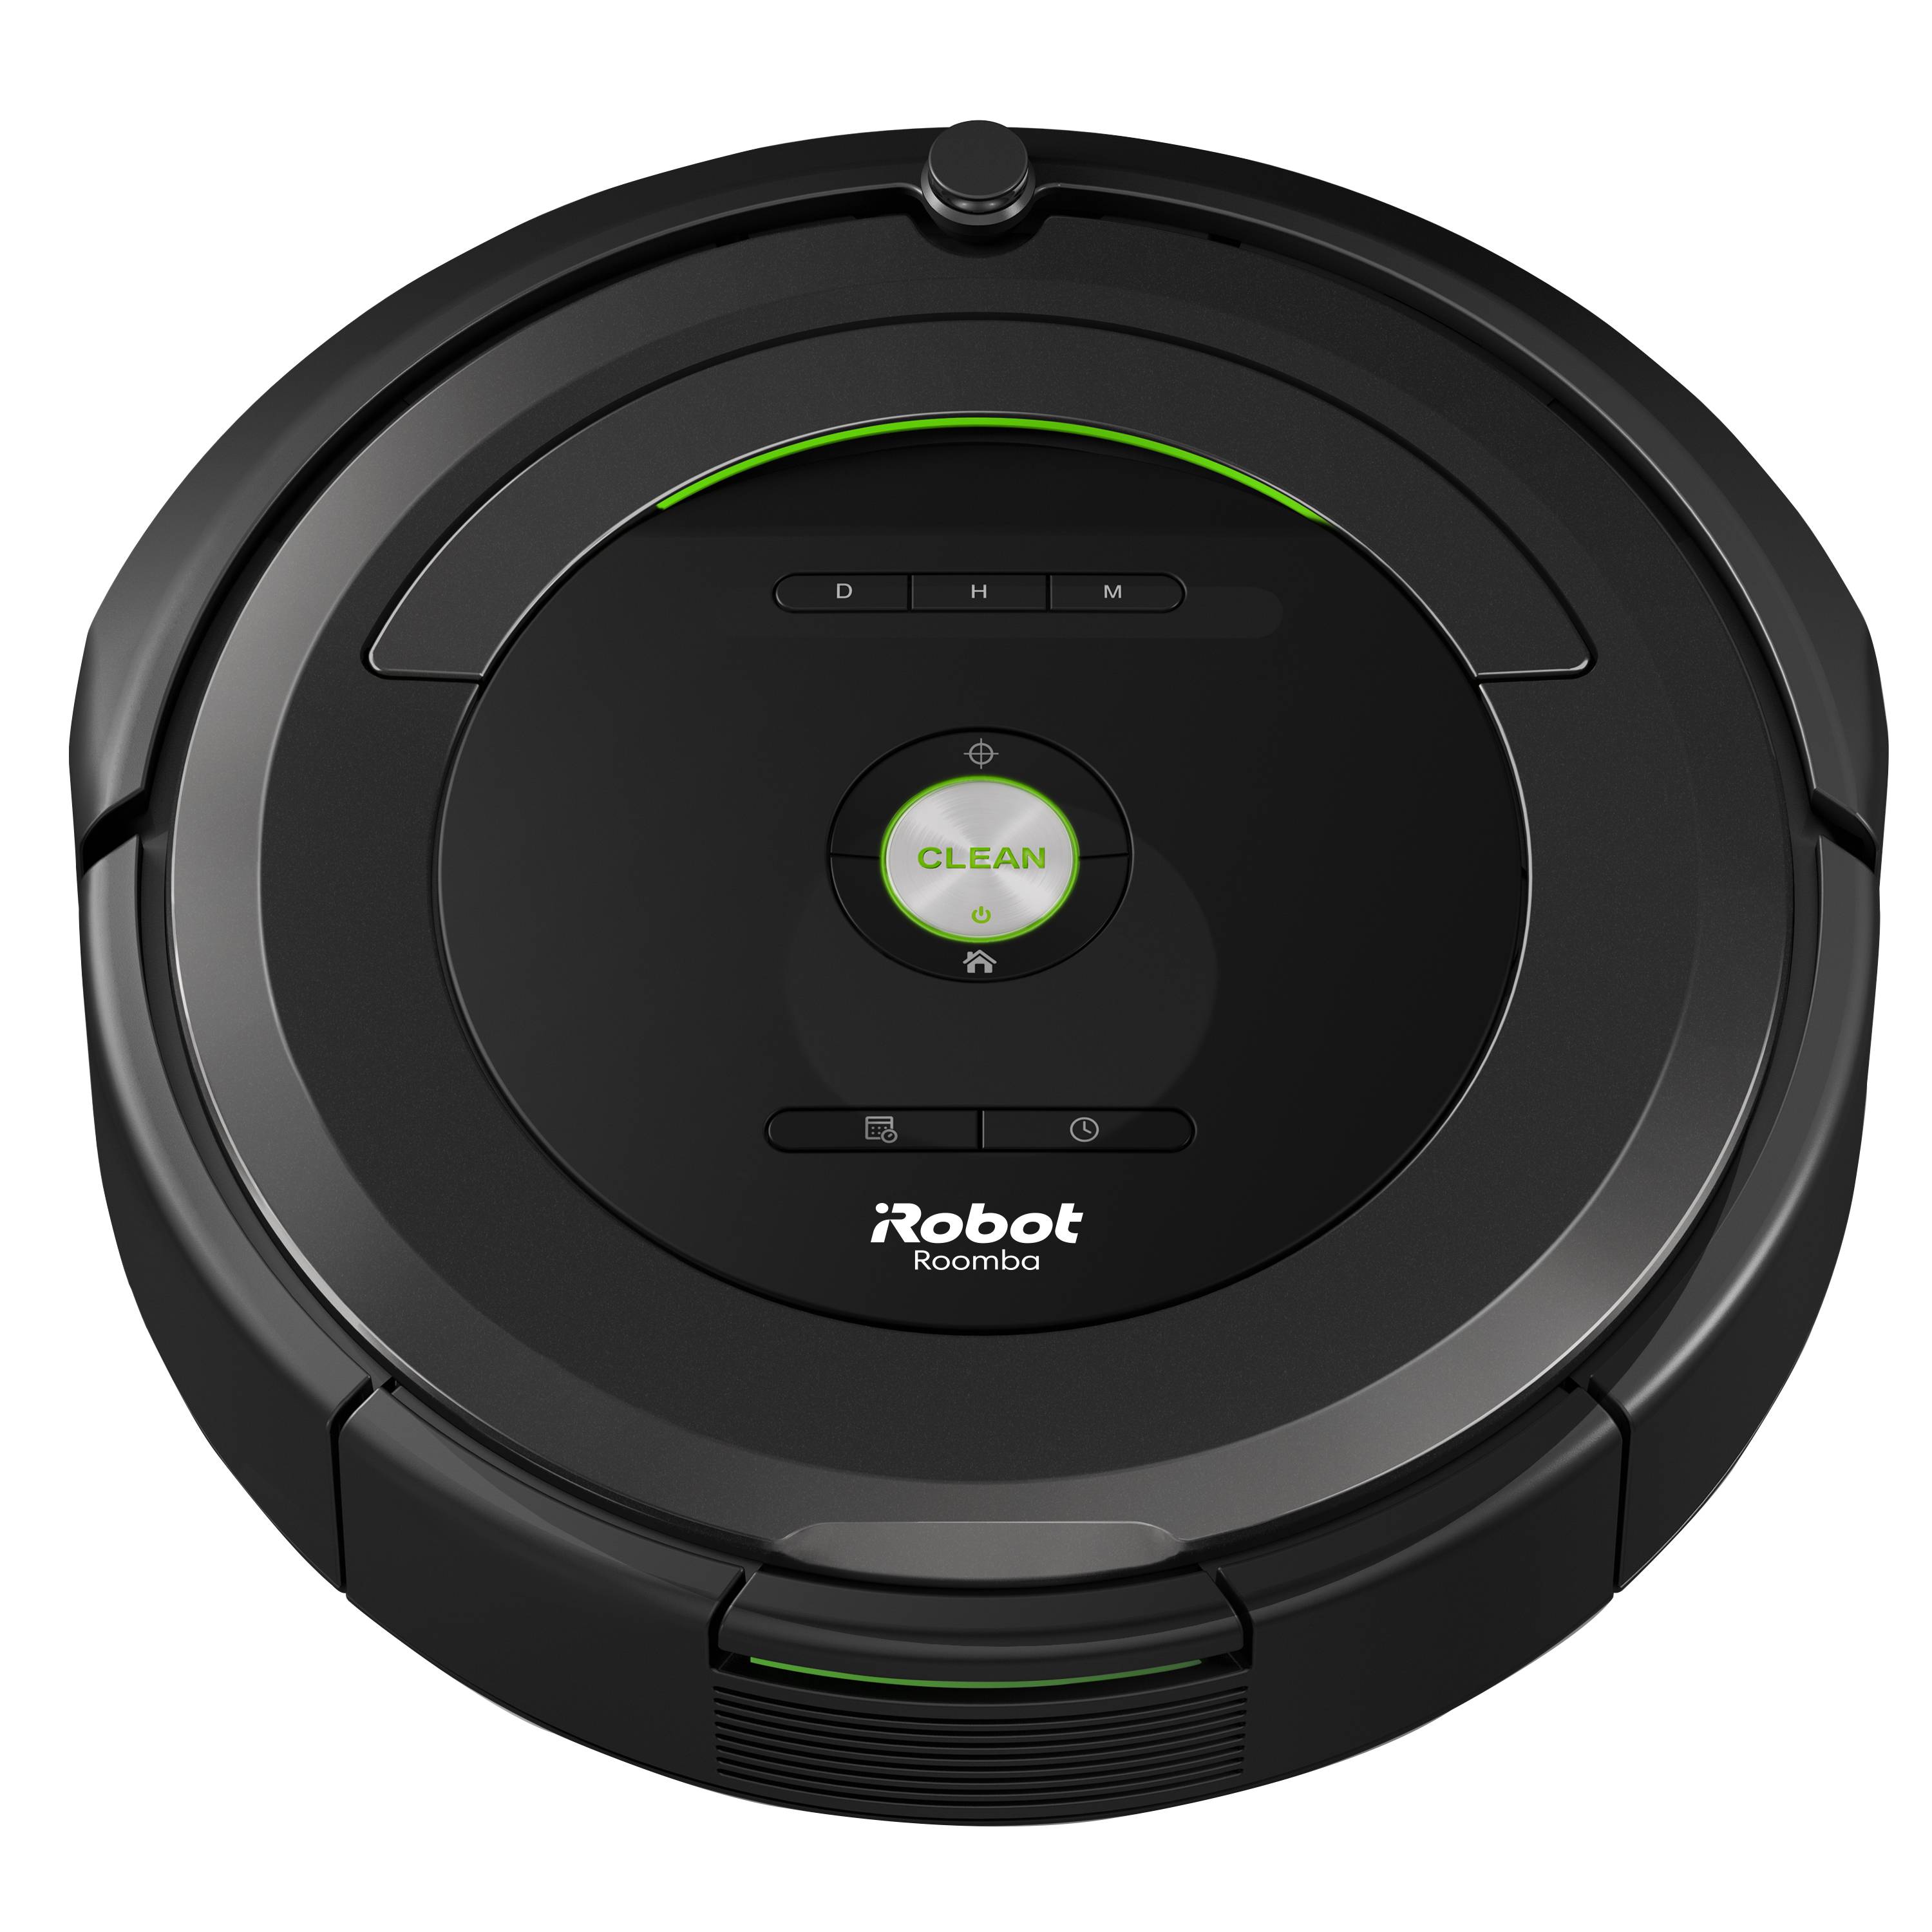 Roomba by iRobot 680 Robot Vacuum with Manufacturer's Warranty - image 1 of 8